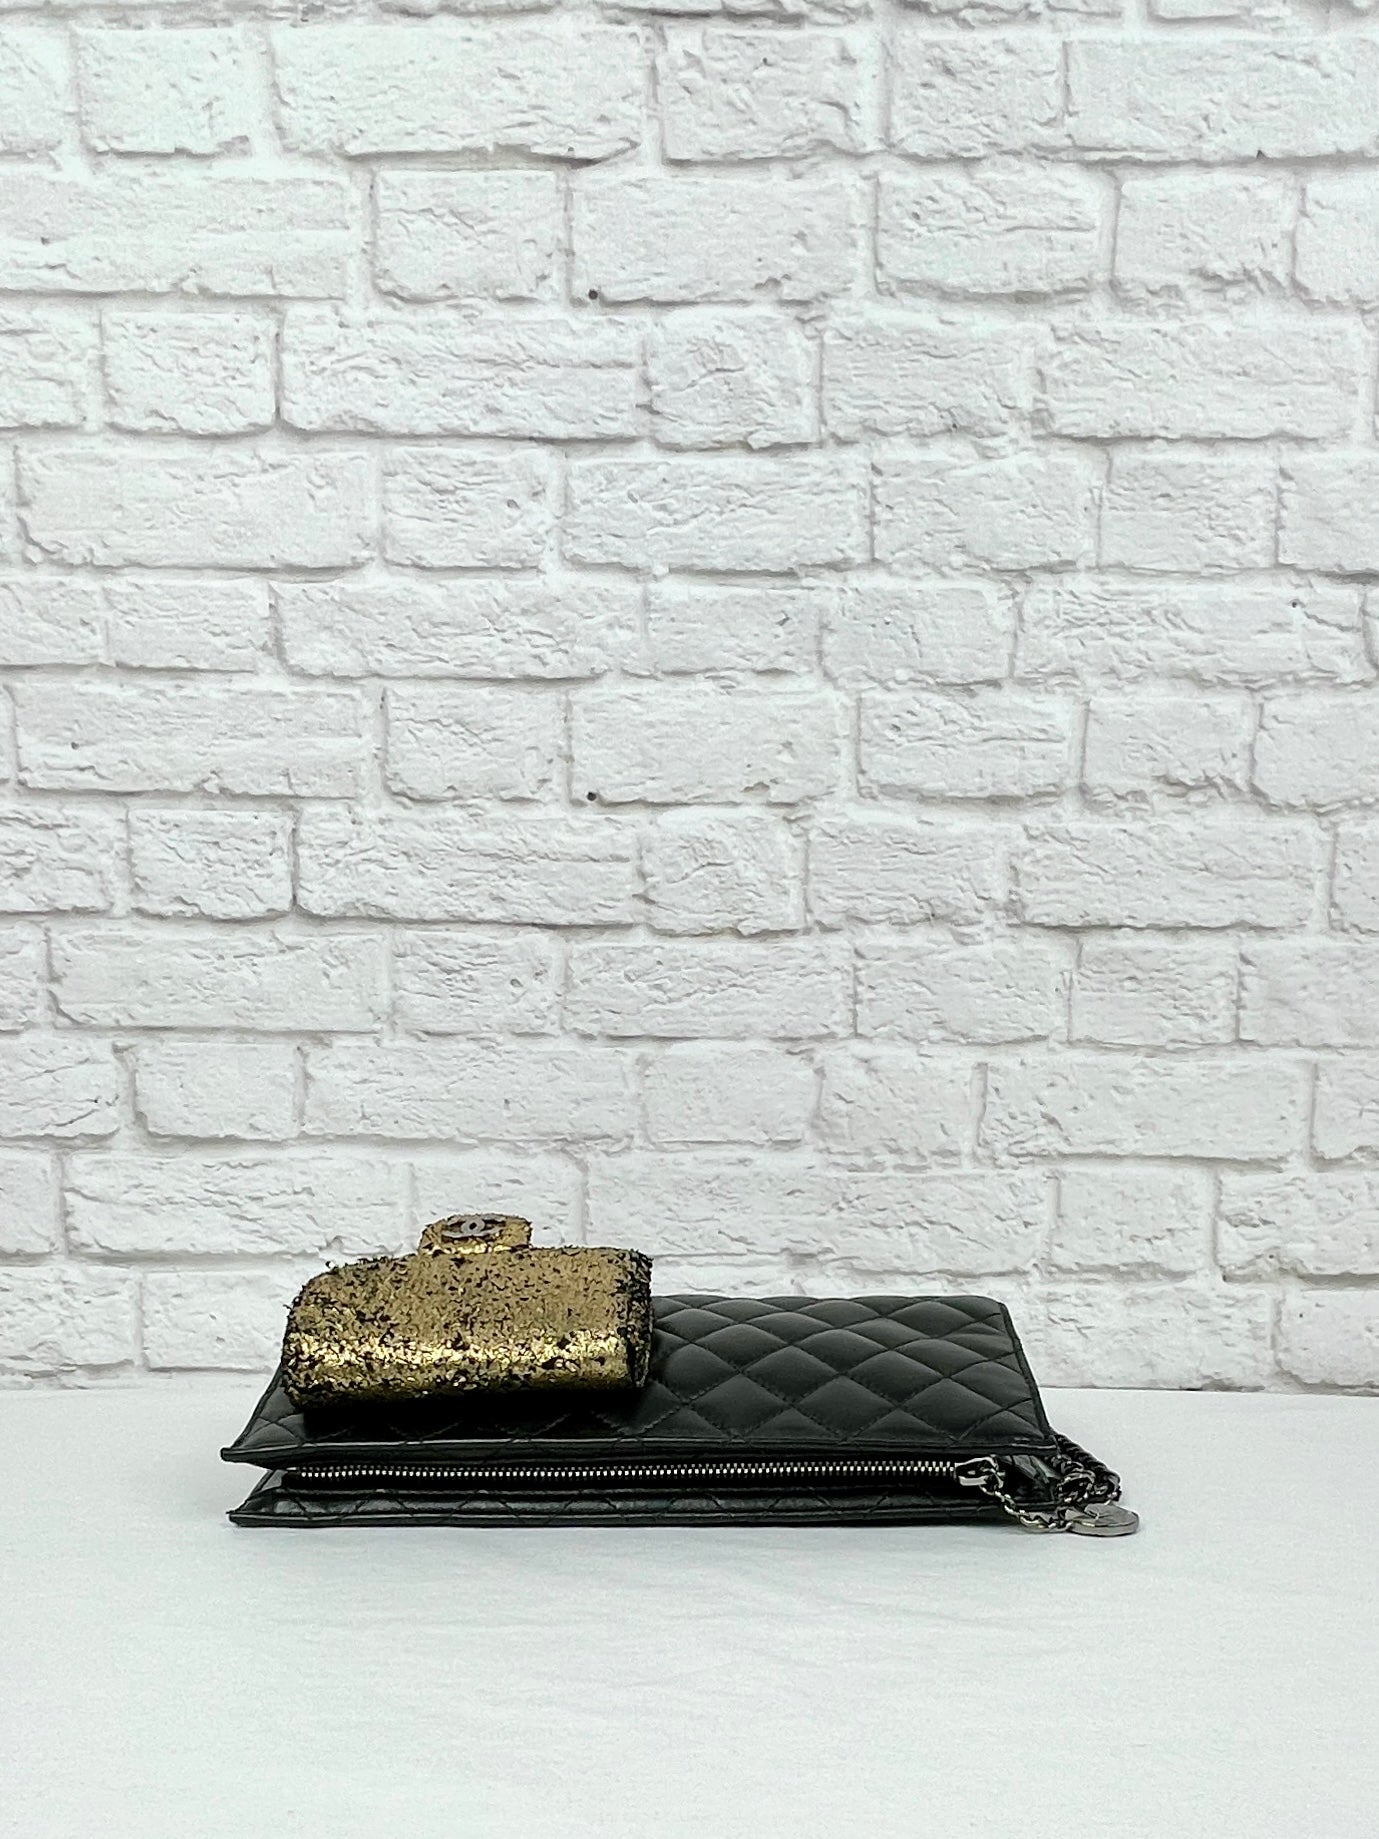 Chanel Mineral Nights 2012 Quilted Leather Clutch/Wristlet